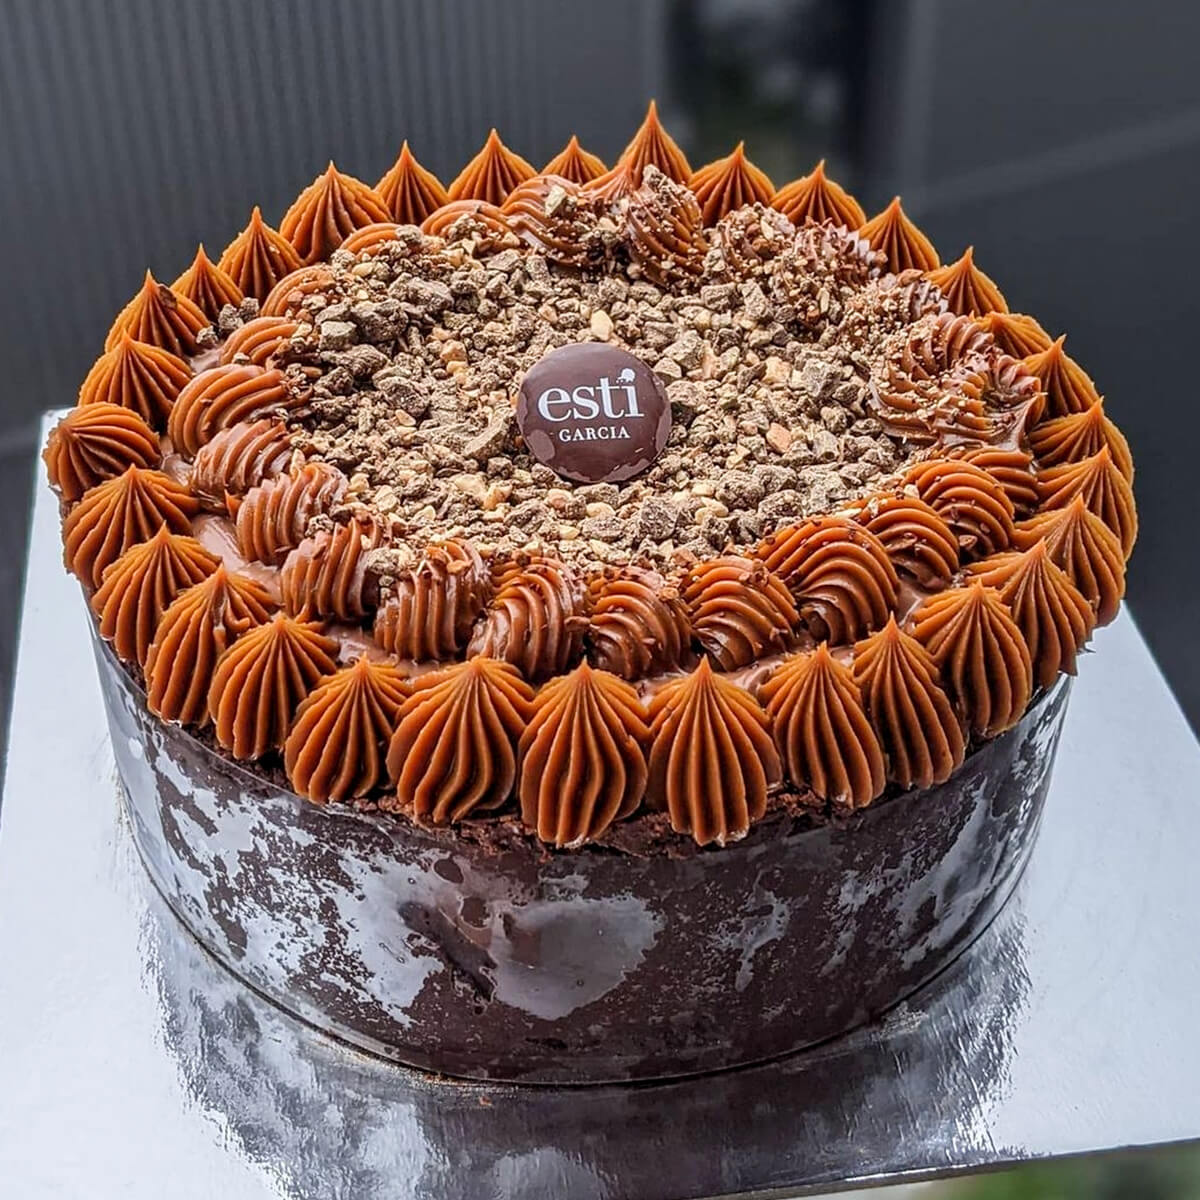 Chocolate and dulce de leche cake in Sydney